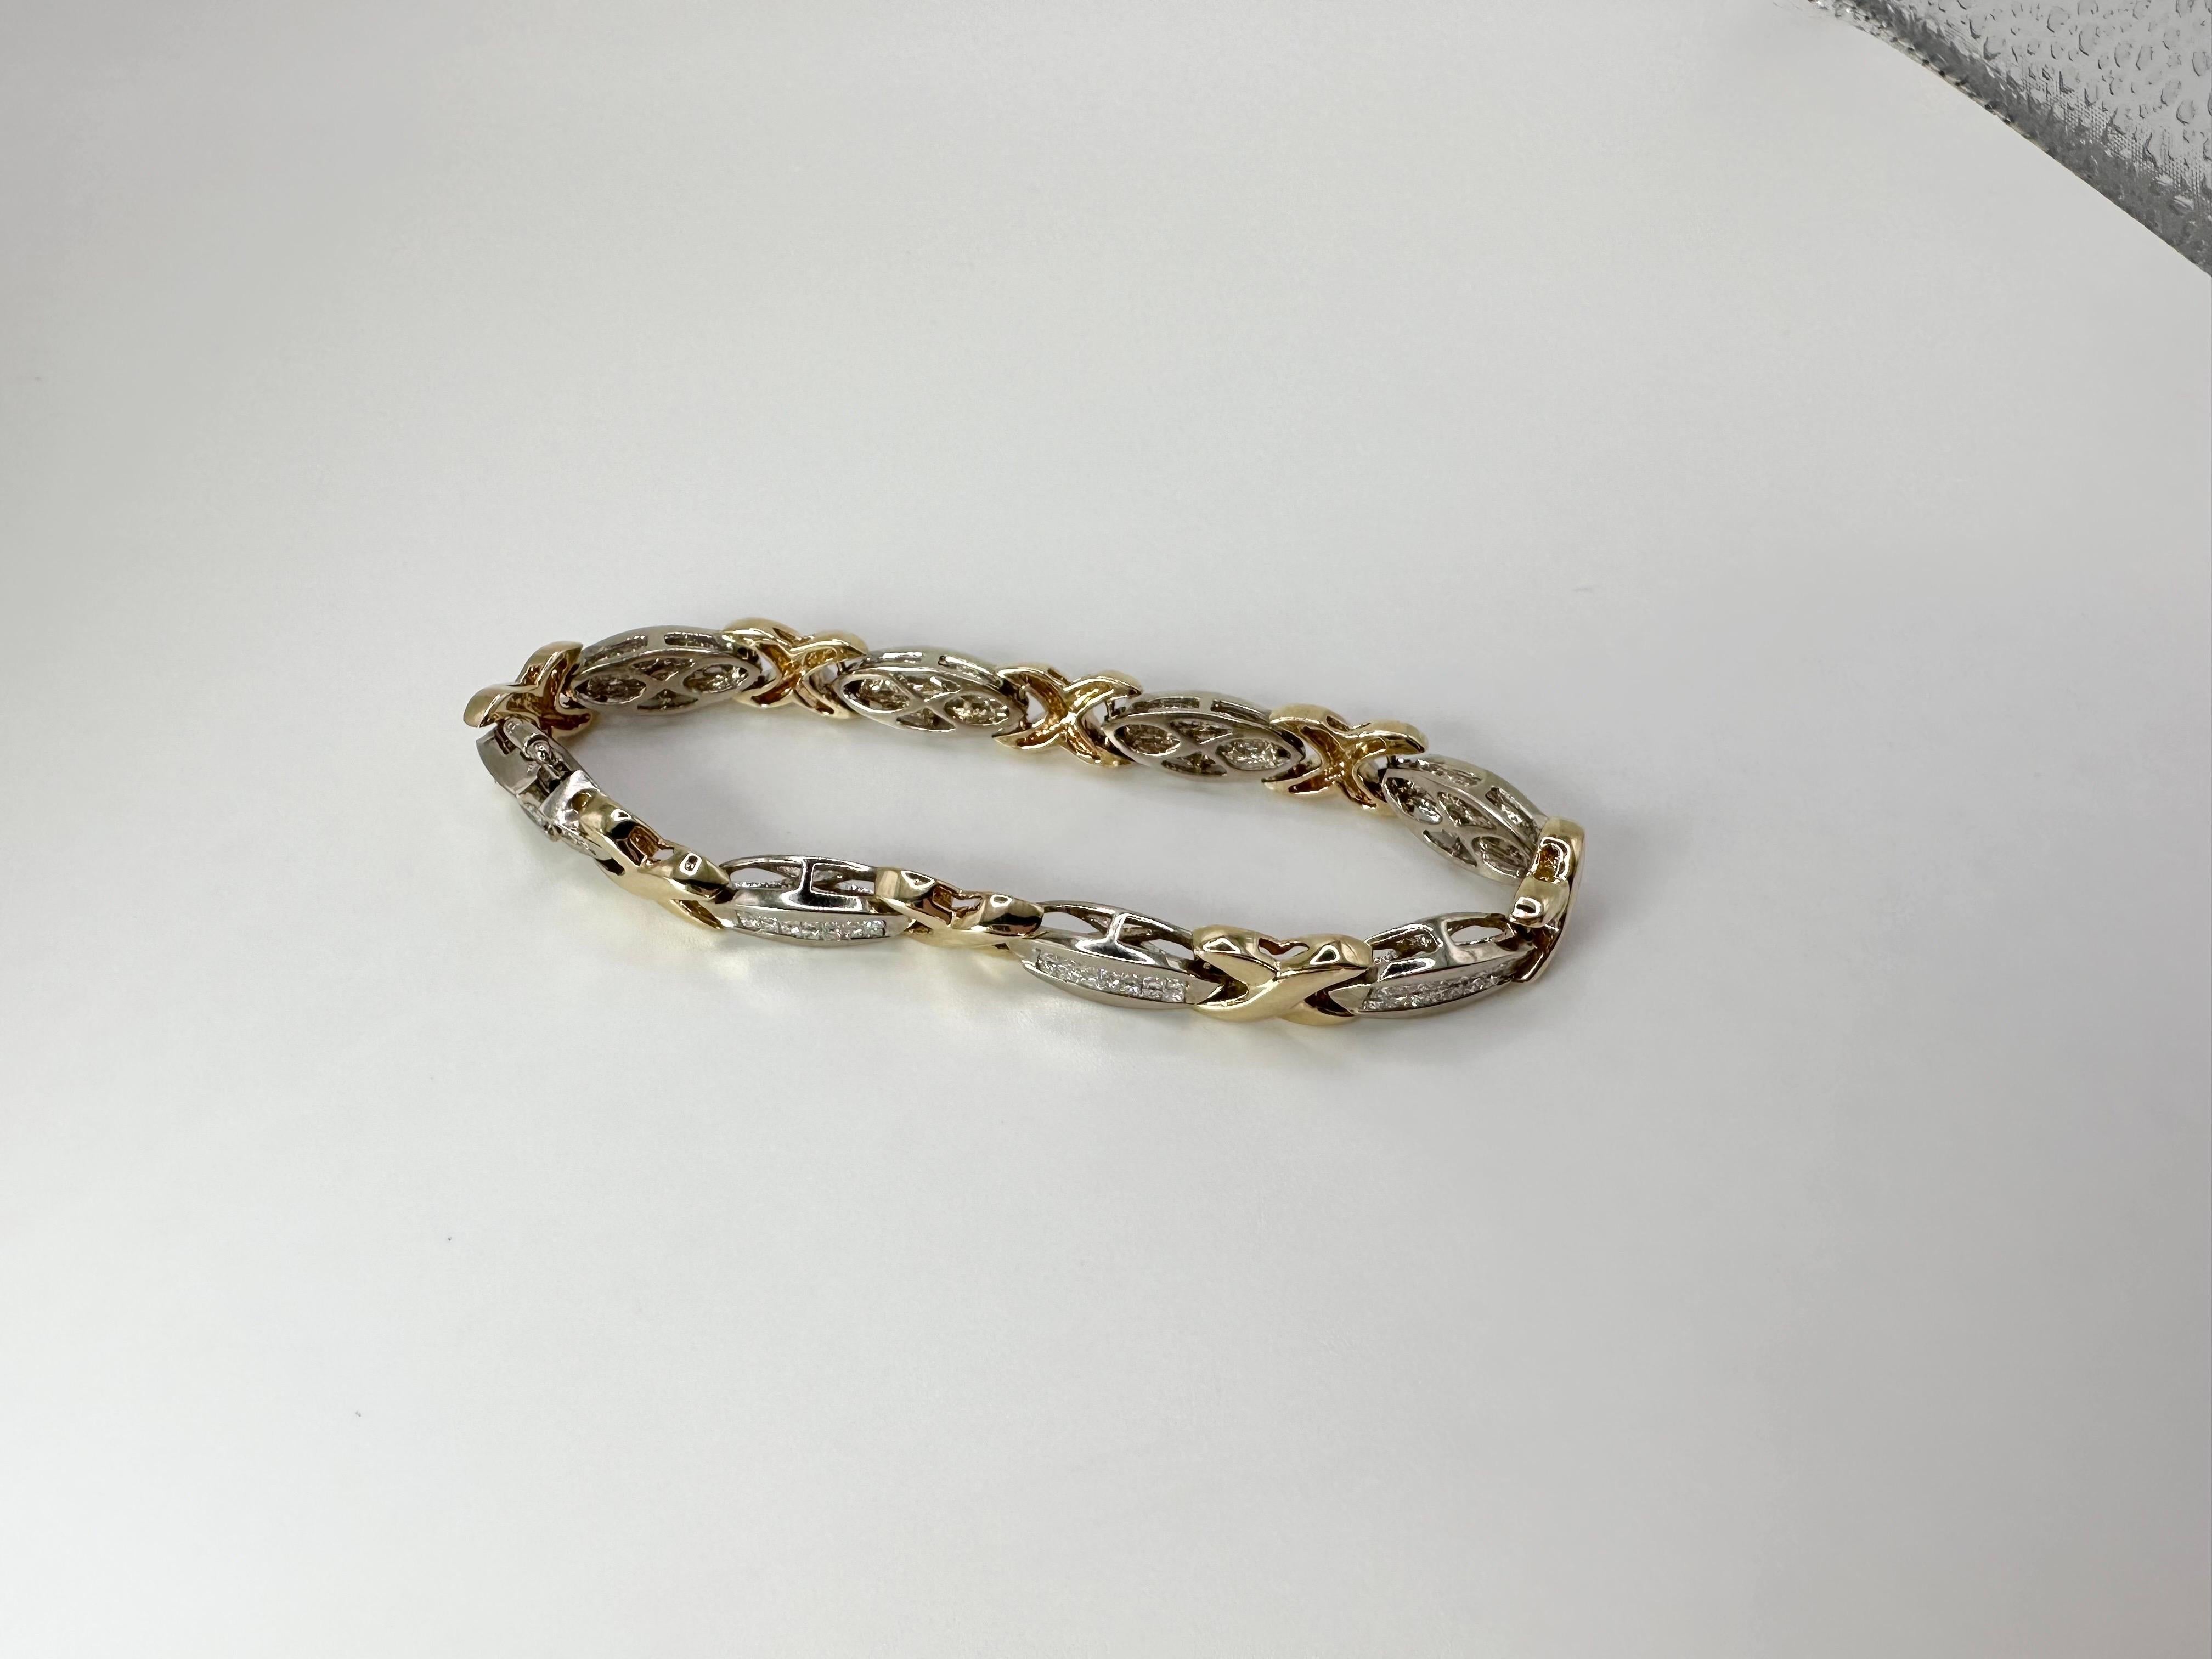 Diamond bracelet with stunning invisible setting!!! Made in 14kt yellow gold with 3.20 carats of diamonds! All diamonds are natural and certified,

GOLD: 14KT yellowgold
NATURAL DIAMOND(S)
Clarity/Color: VS-SI/F-G-H
Carat:3.20ct
Gram(s):